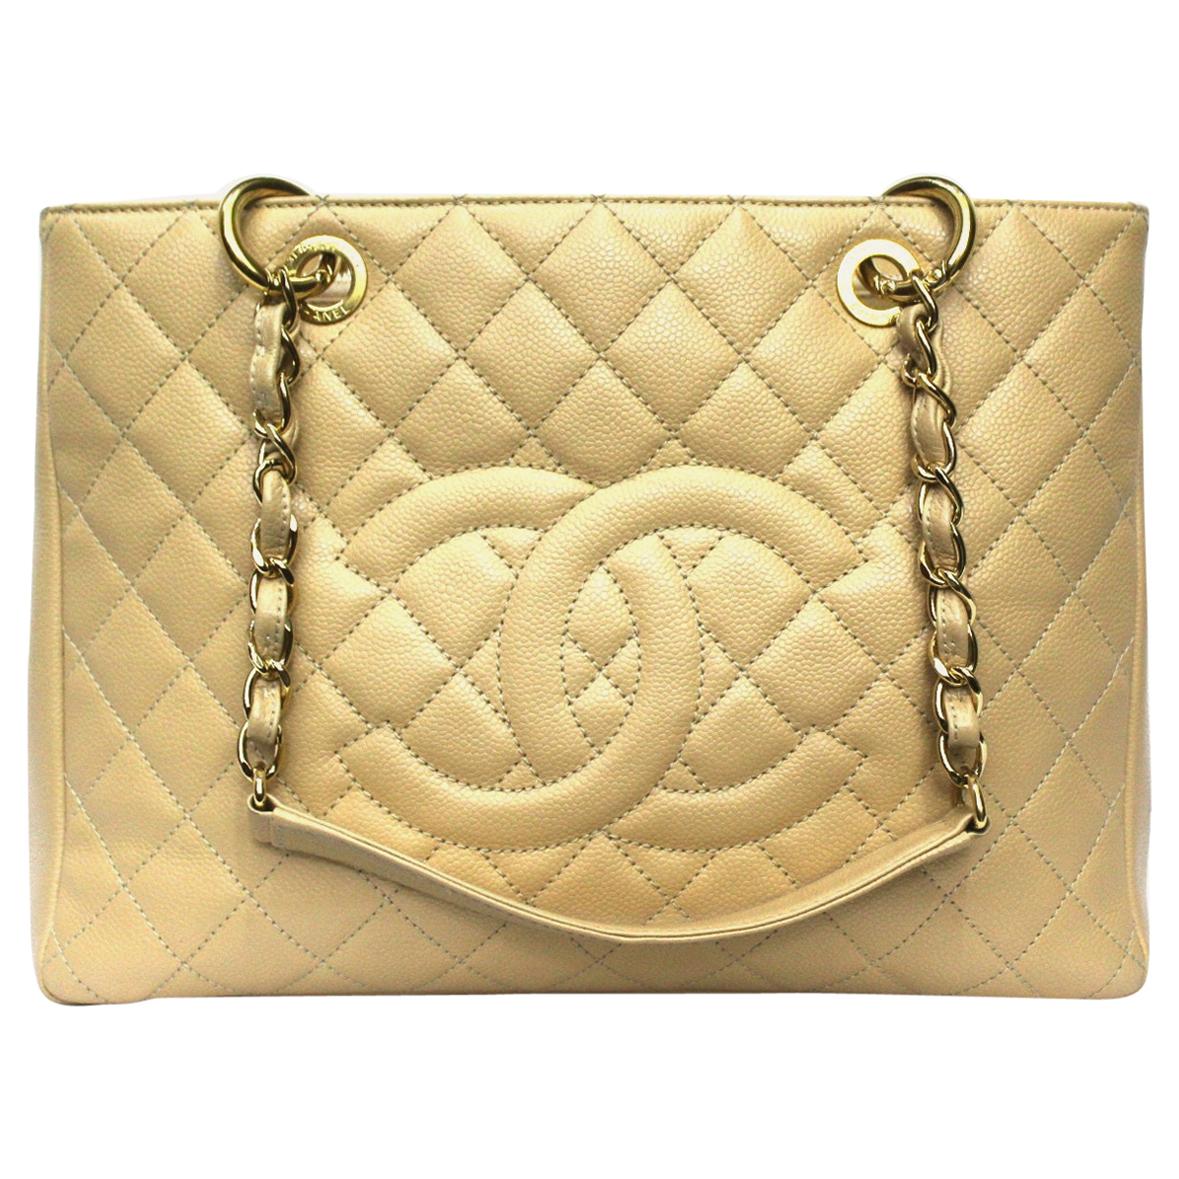 Chanel Beige Leather GST Bag